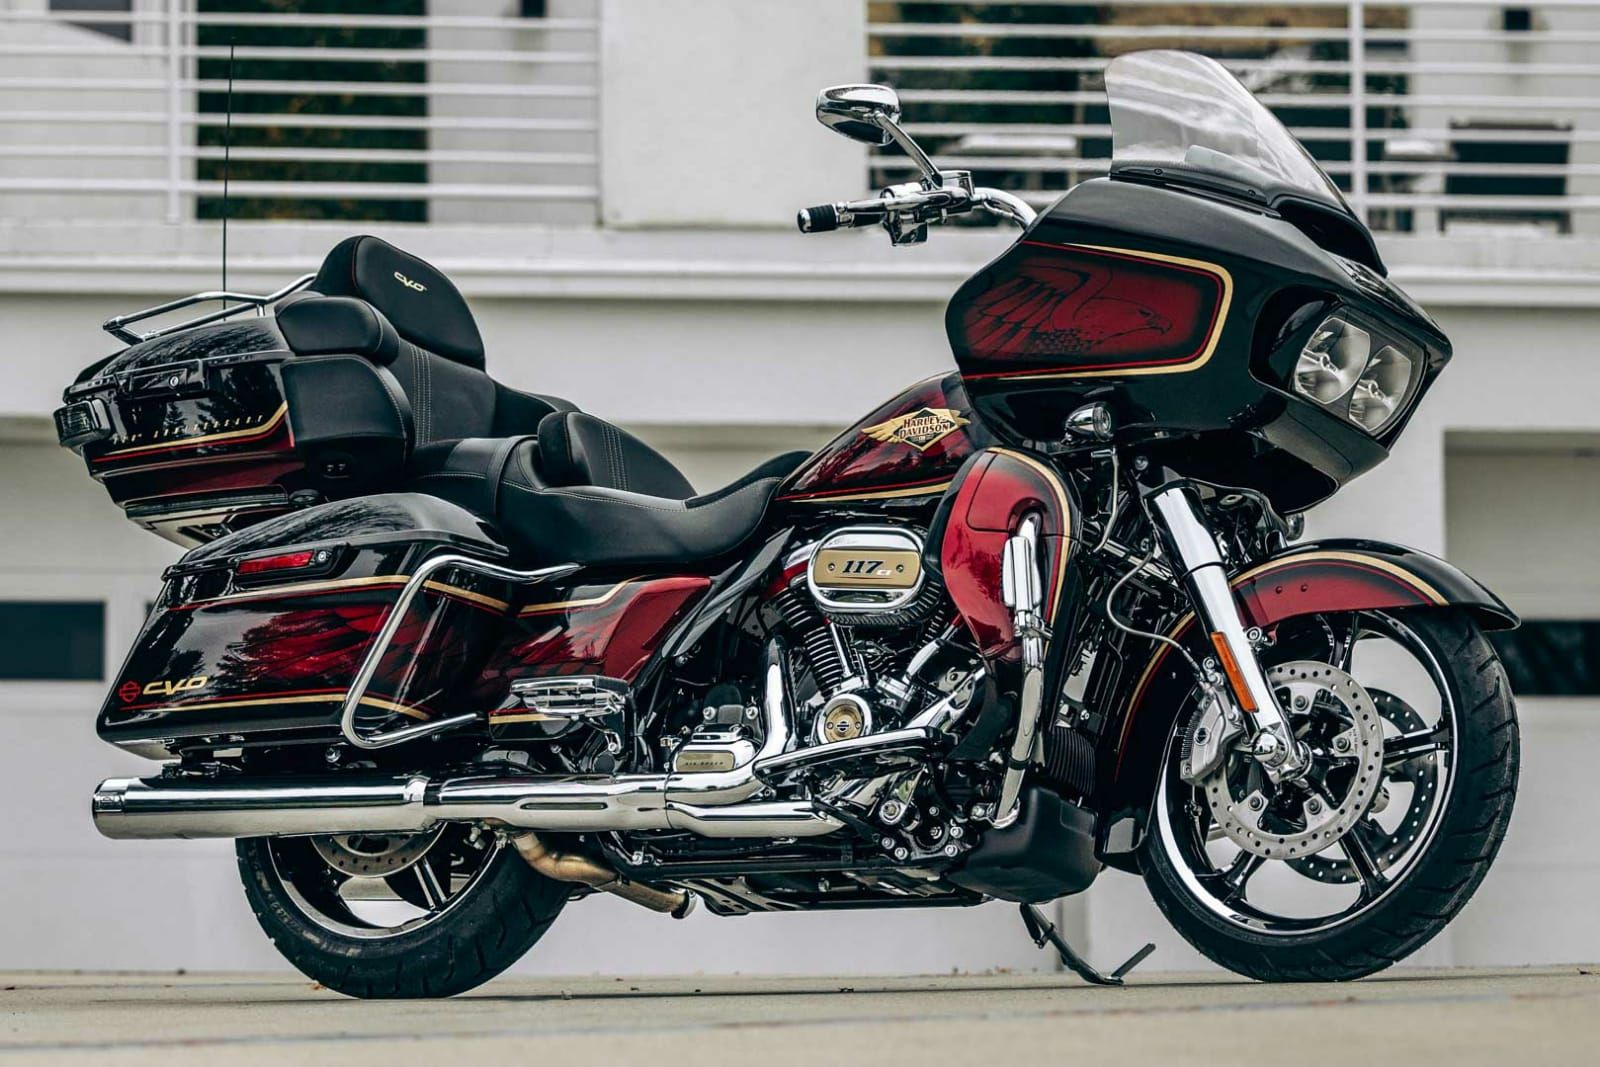 What You Need To Know About Harley-Davidson’s 2023 Lineup